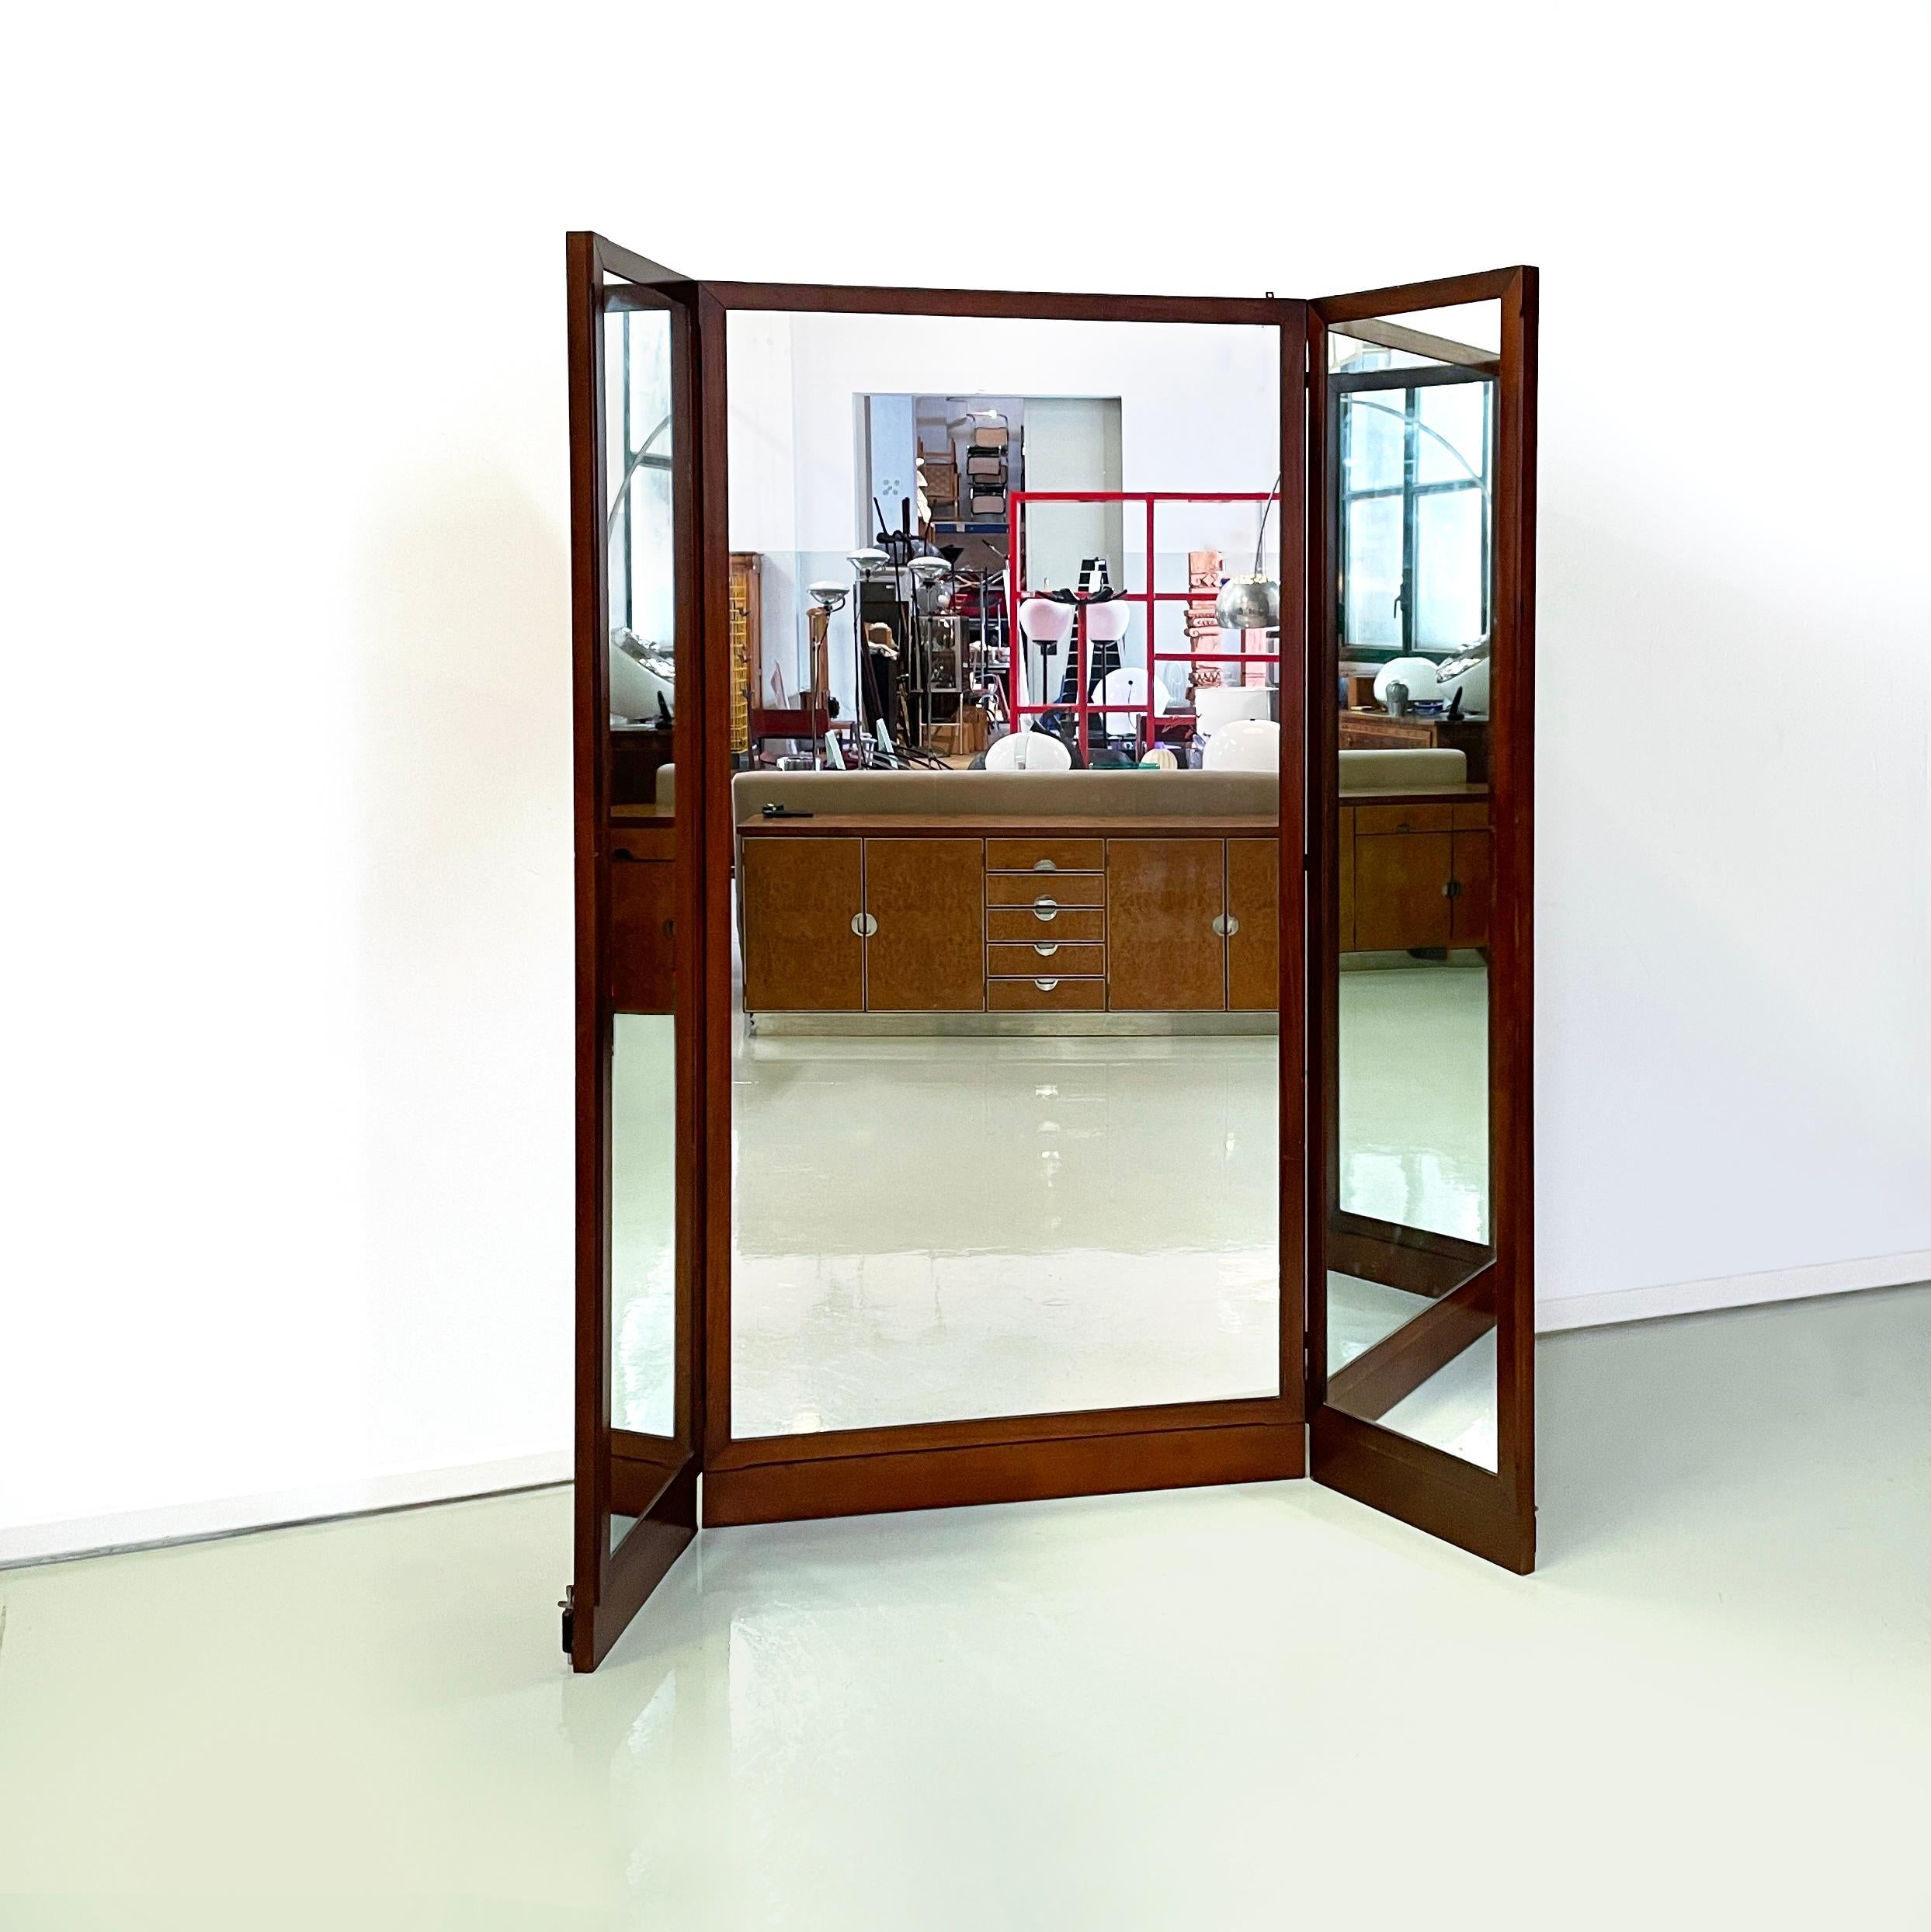 Italian mid-century modern Freestanding full-length floor mirror in wood, 1960s
Freestanding full-length floor mirror with 3 doors. The structure and profiles of the mirrors are made of wood. This tailoring mirror can be positioned as desired.
1960